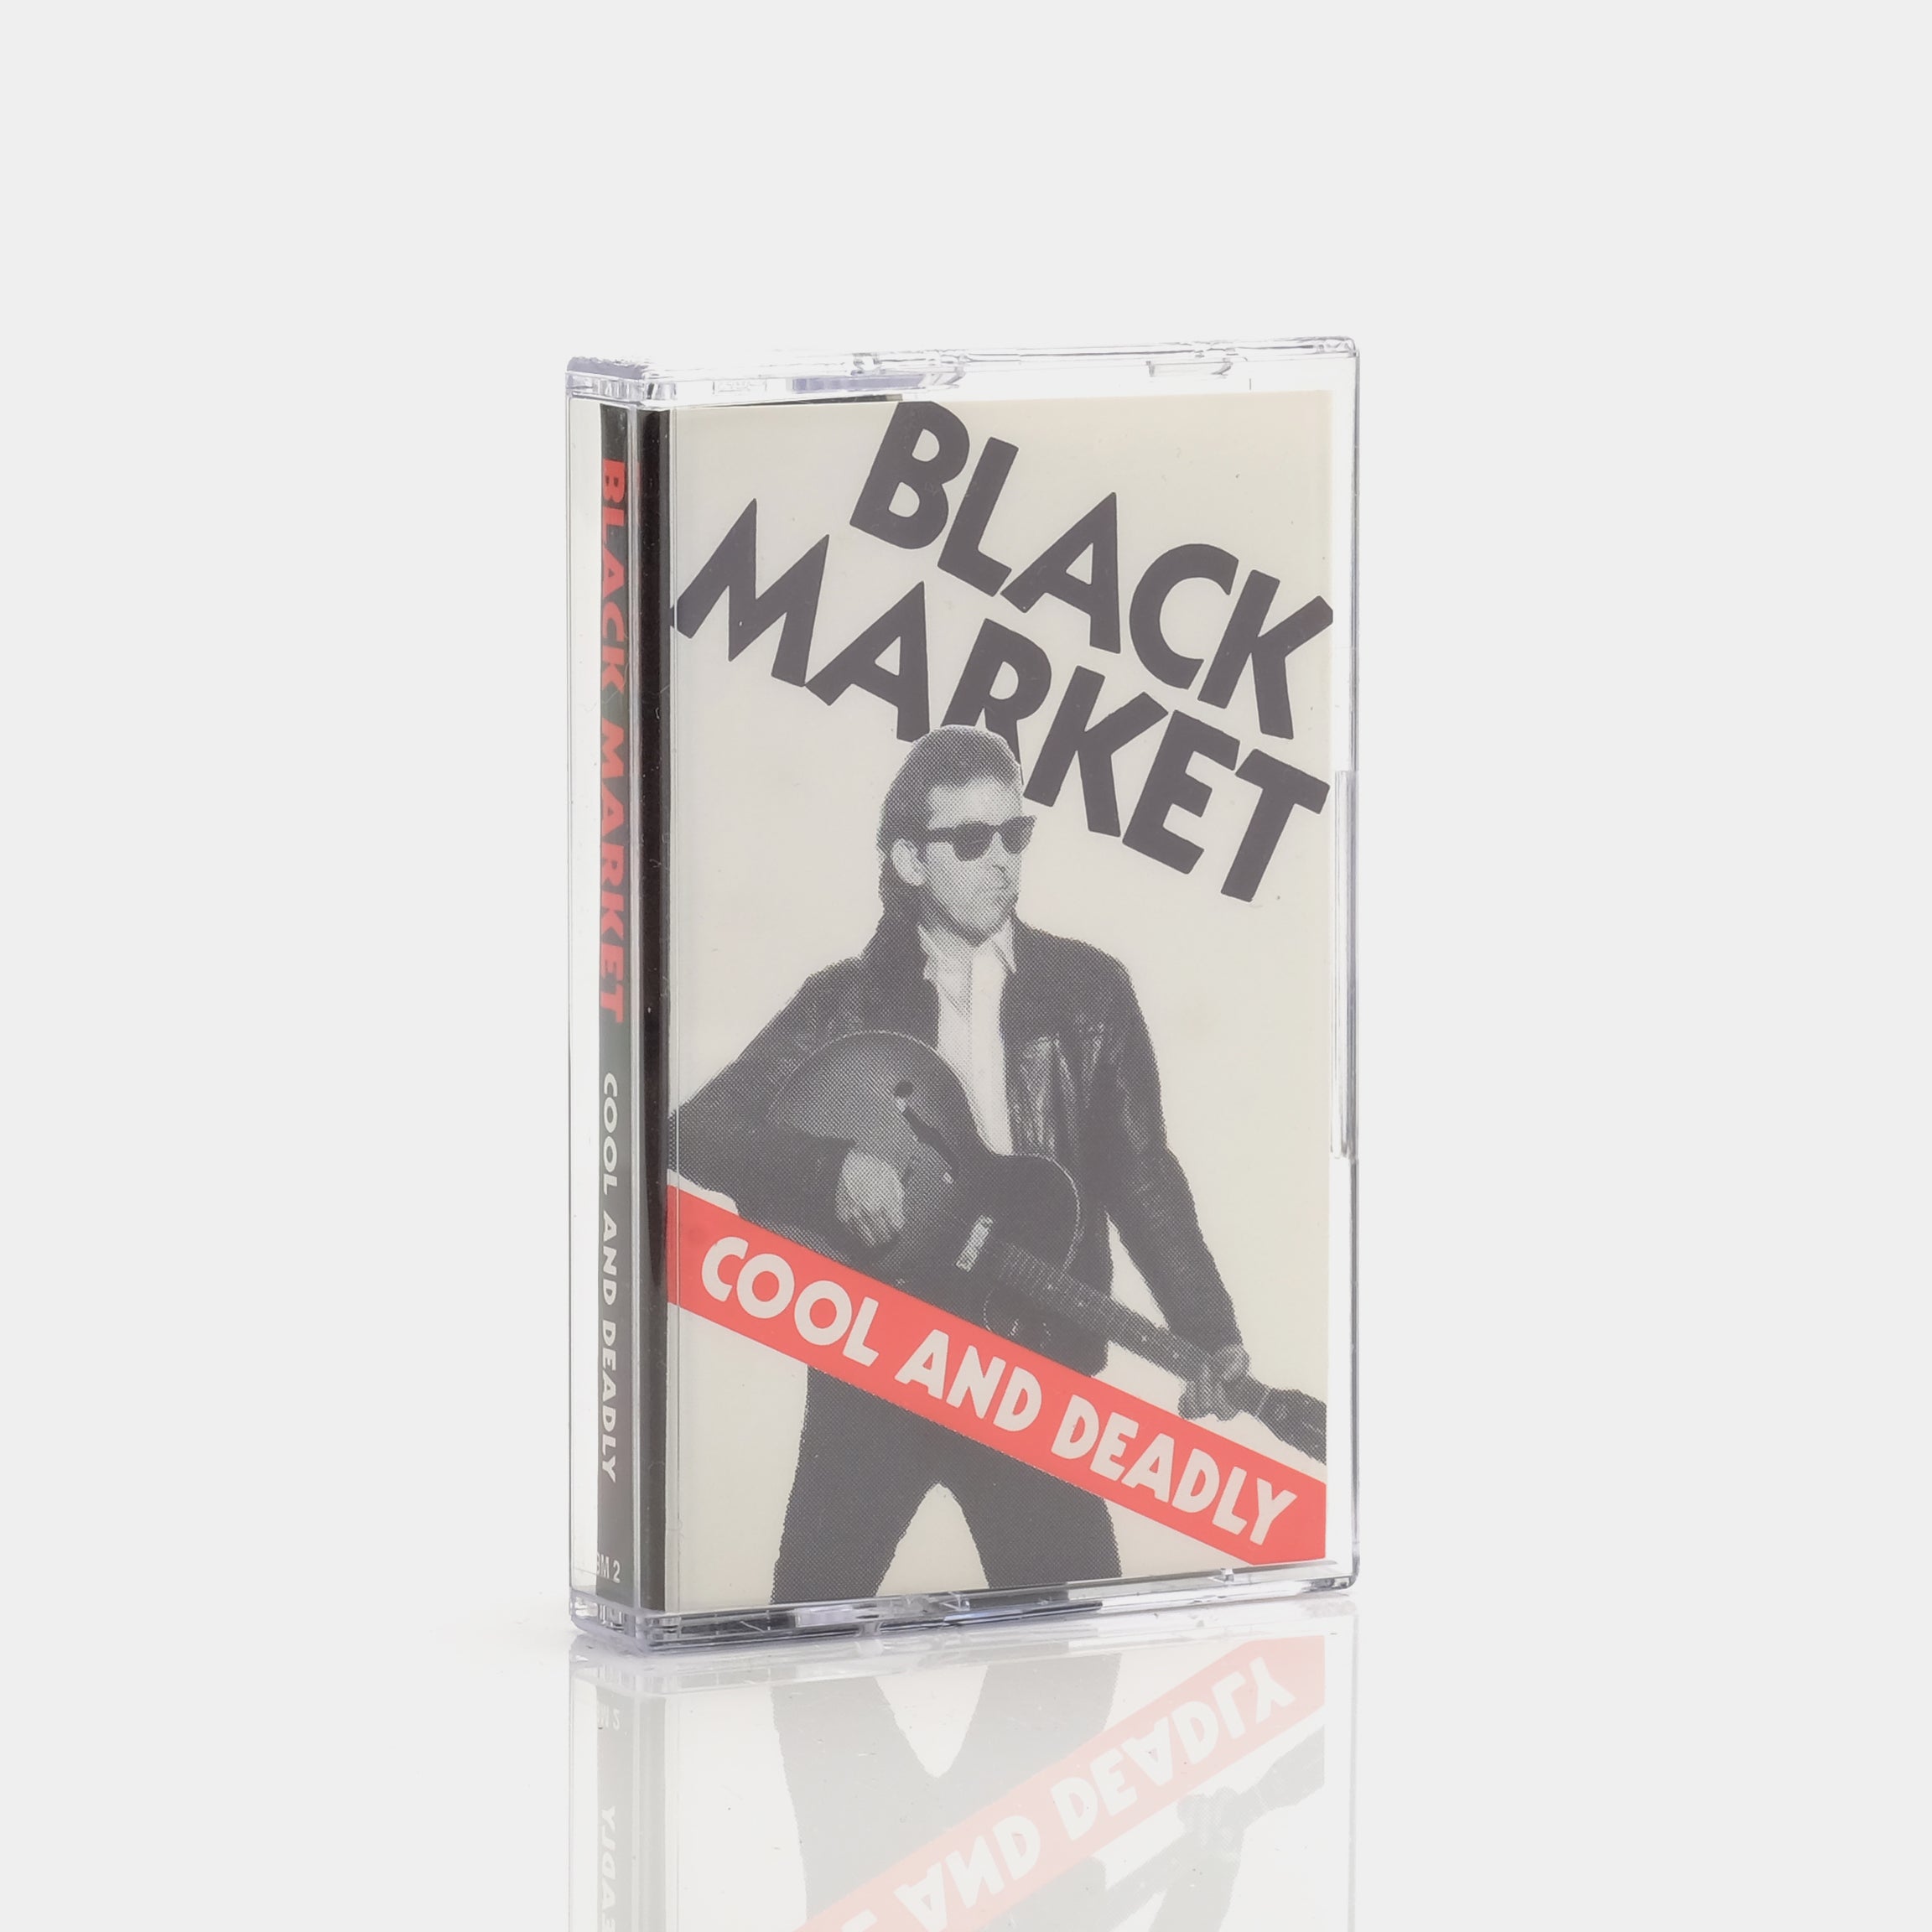 Black Market - Cool And Deadly Cassette Tape